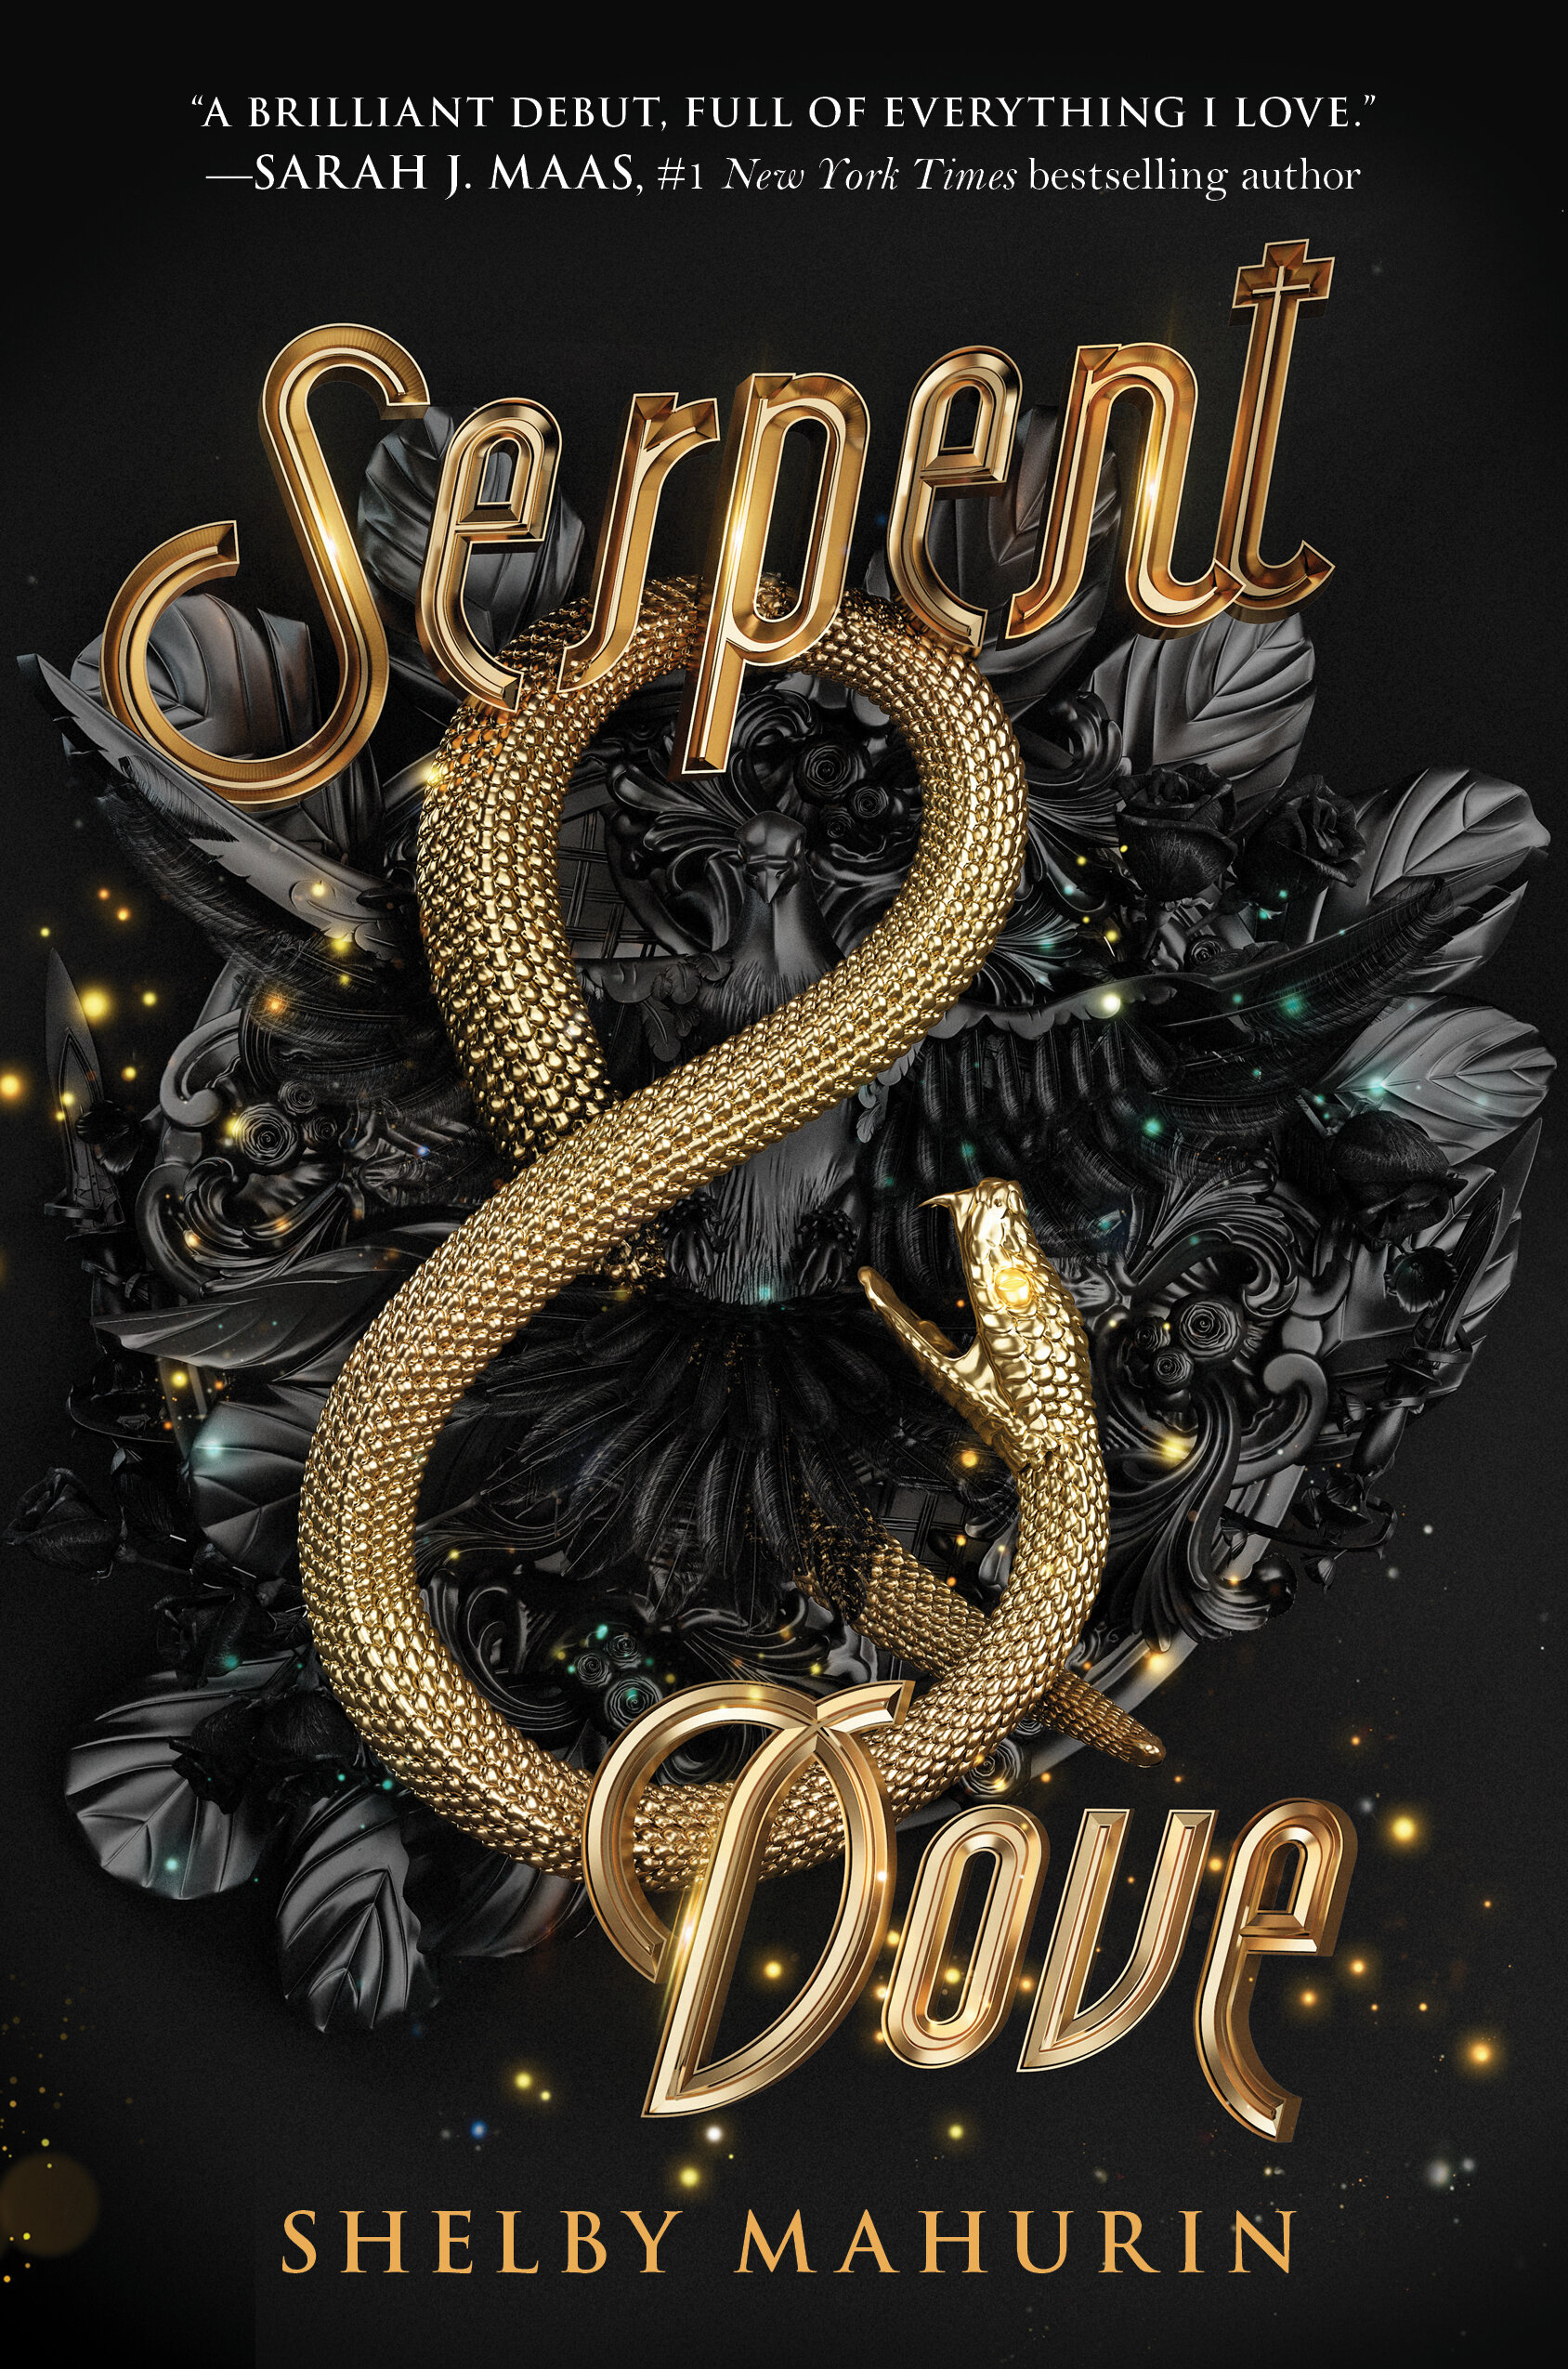 SERPENT AND DOVE.jpg